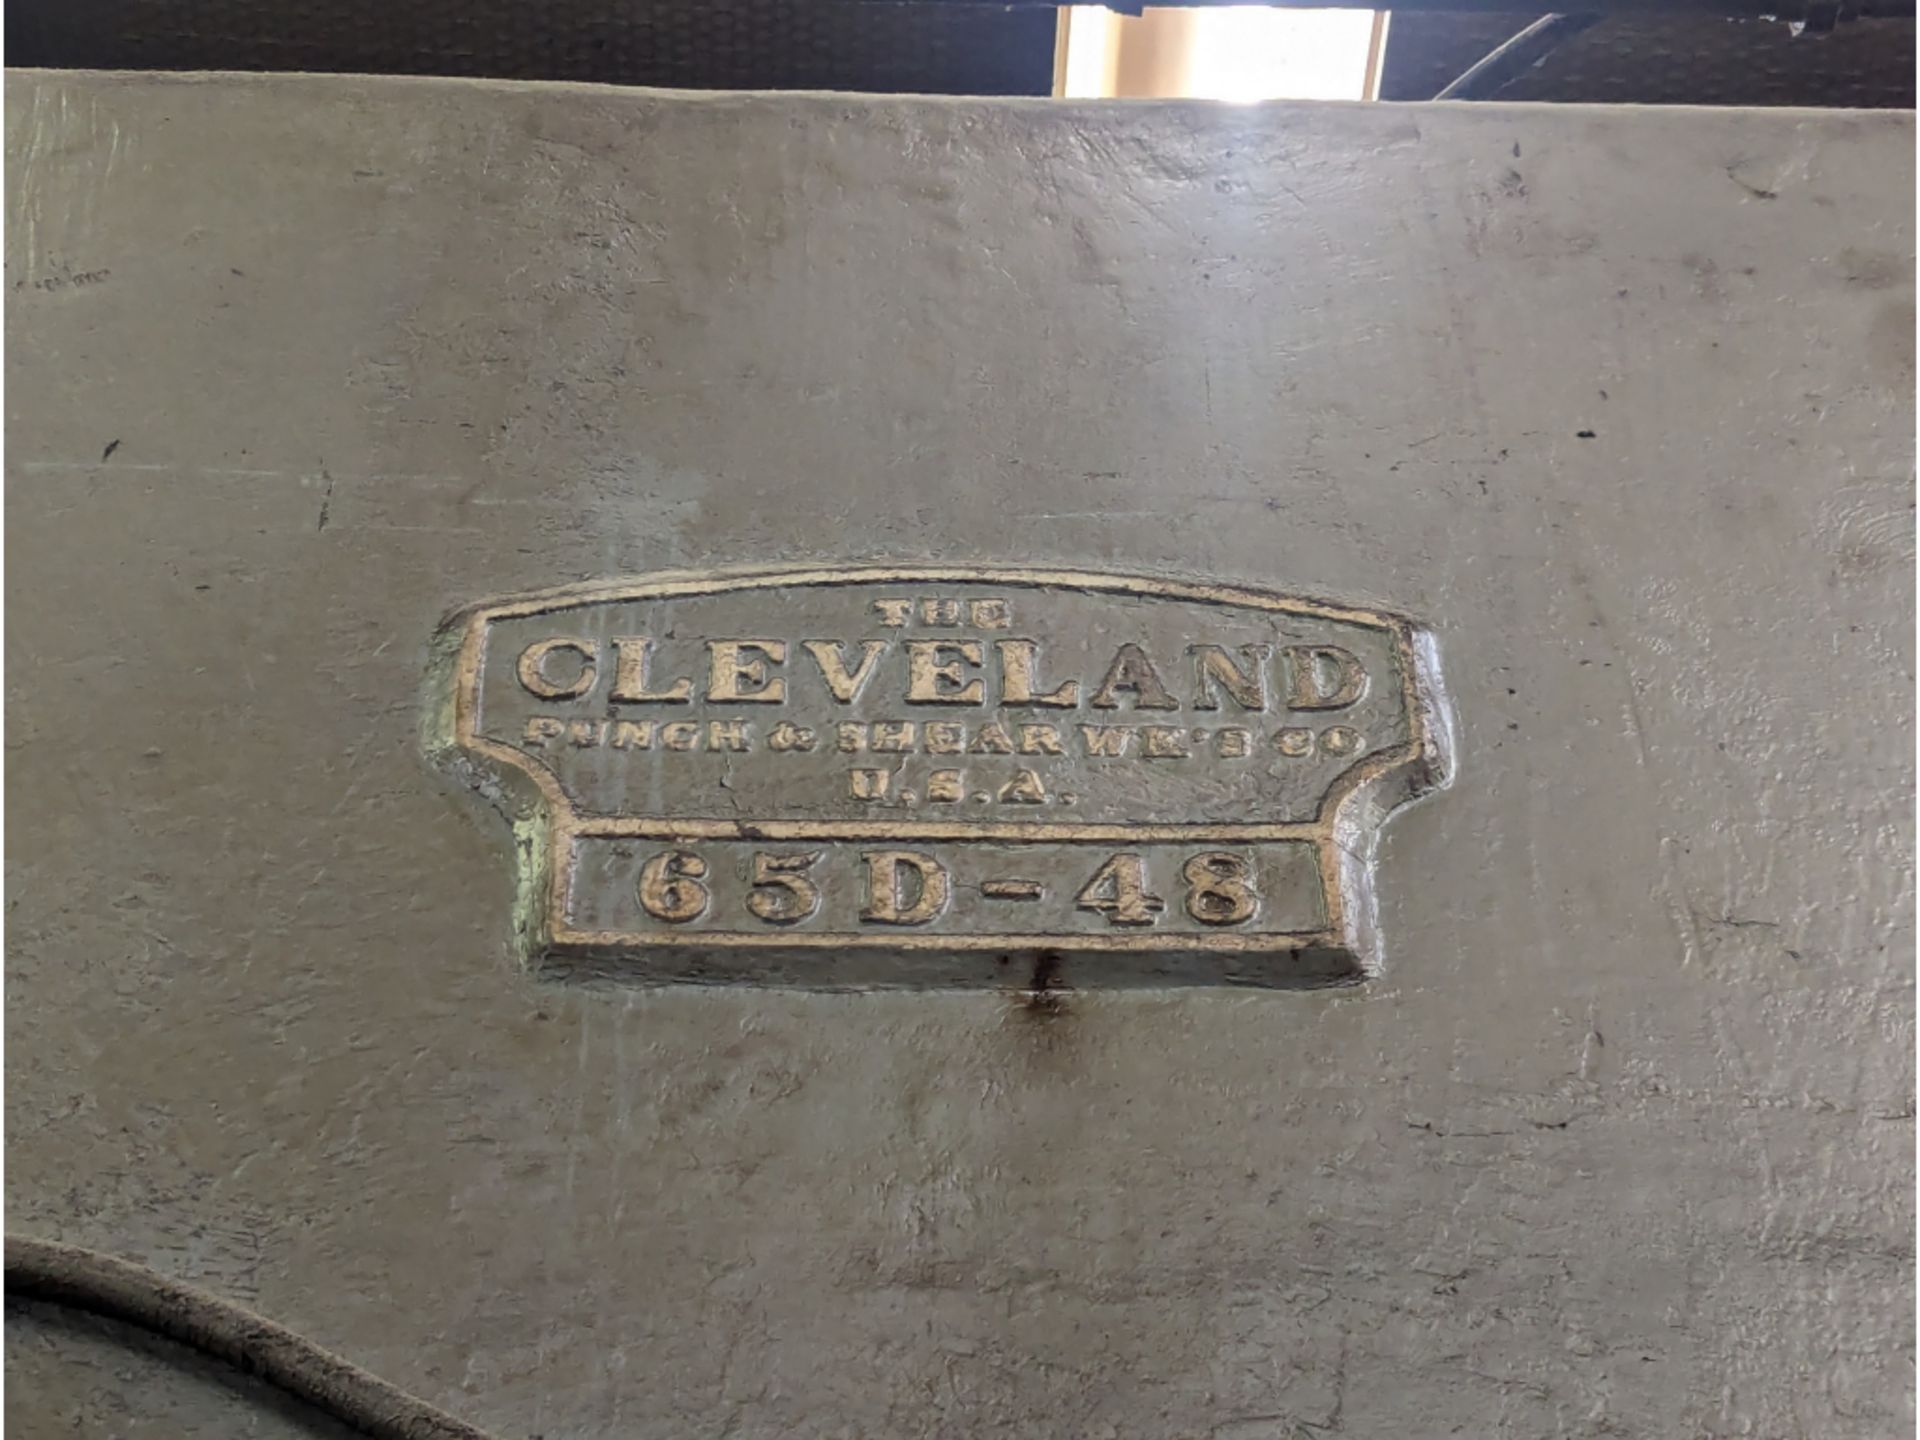 Cleveland 65D-48 150 Ton Press - Image 6 of 7